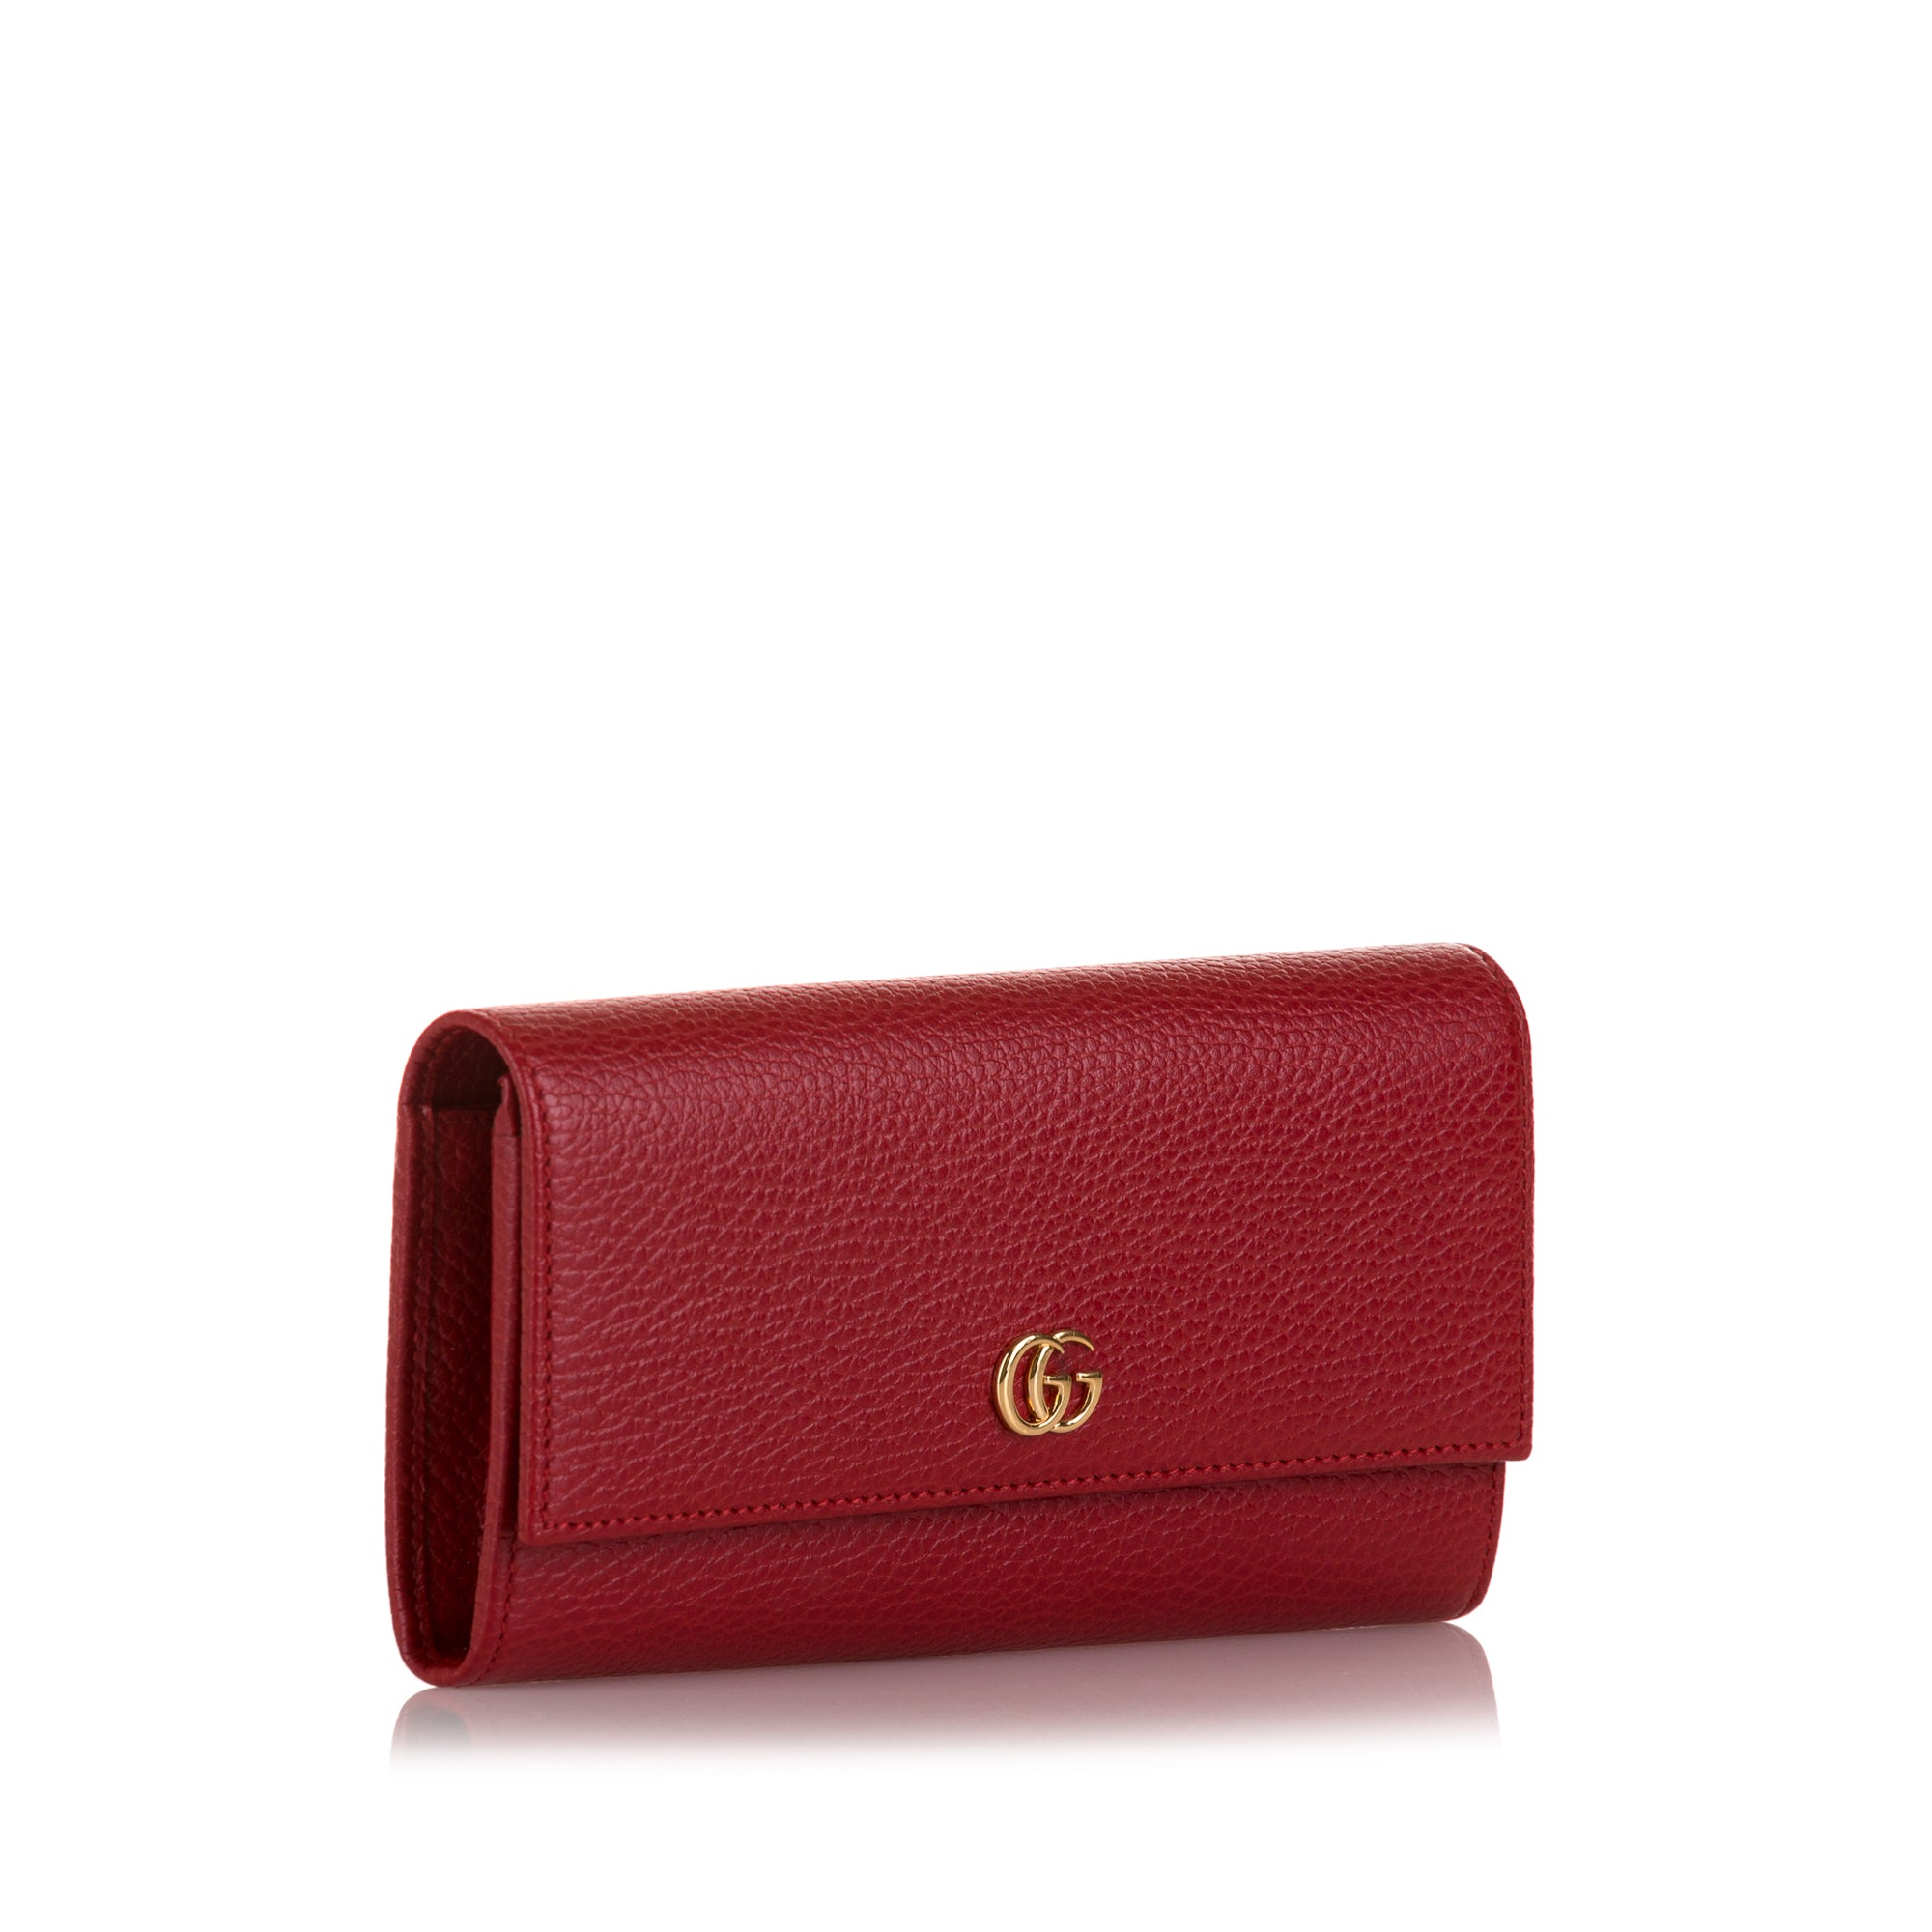 Authentic GUCCI GG Wallet Black/Red Combi